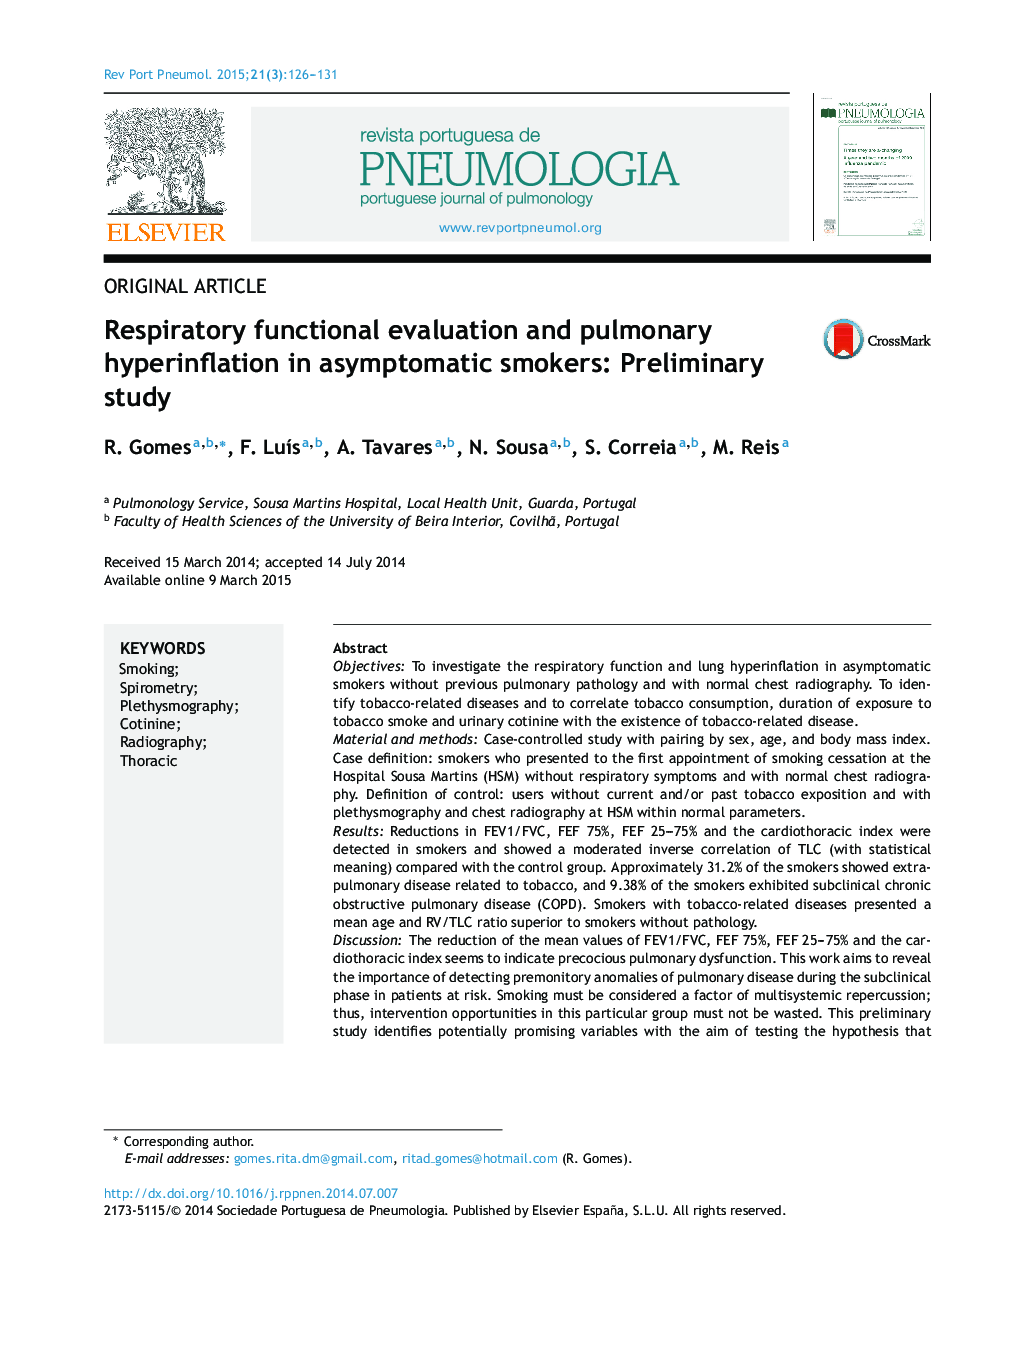 Respiratory functional evaluation and pulmonary hyperinflation in asymptomatic smokers: Preliminary study